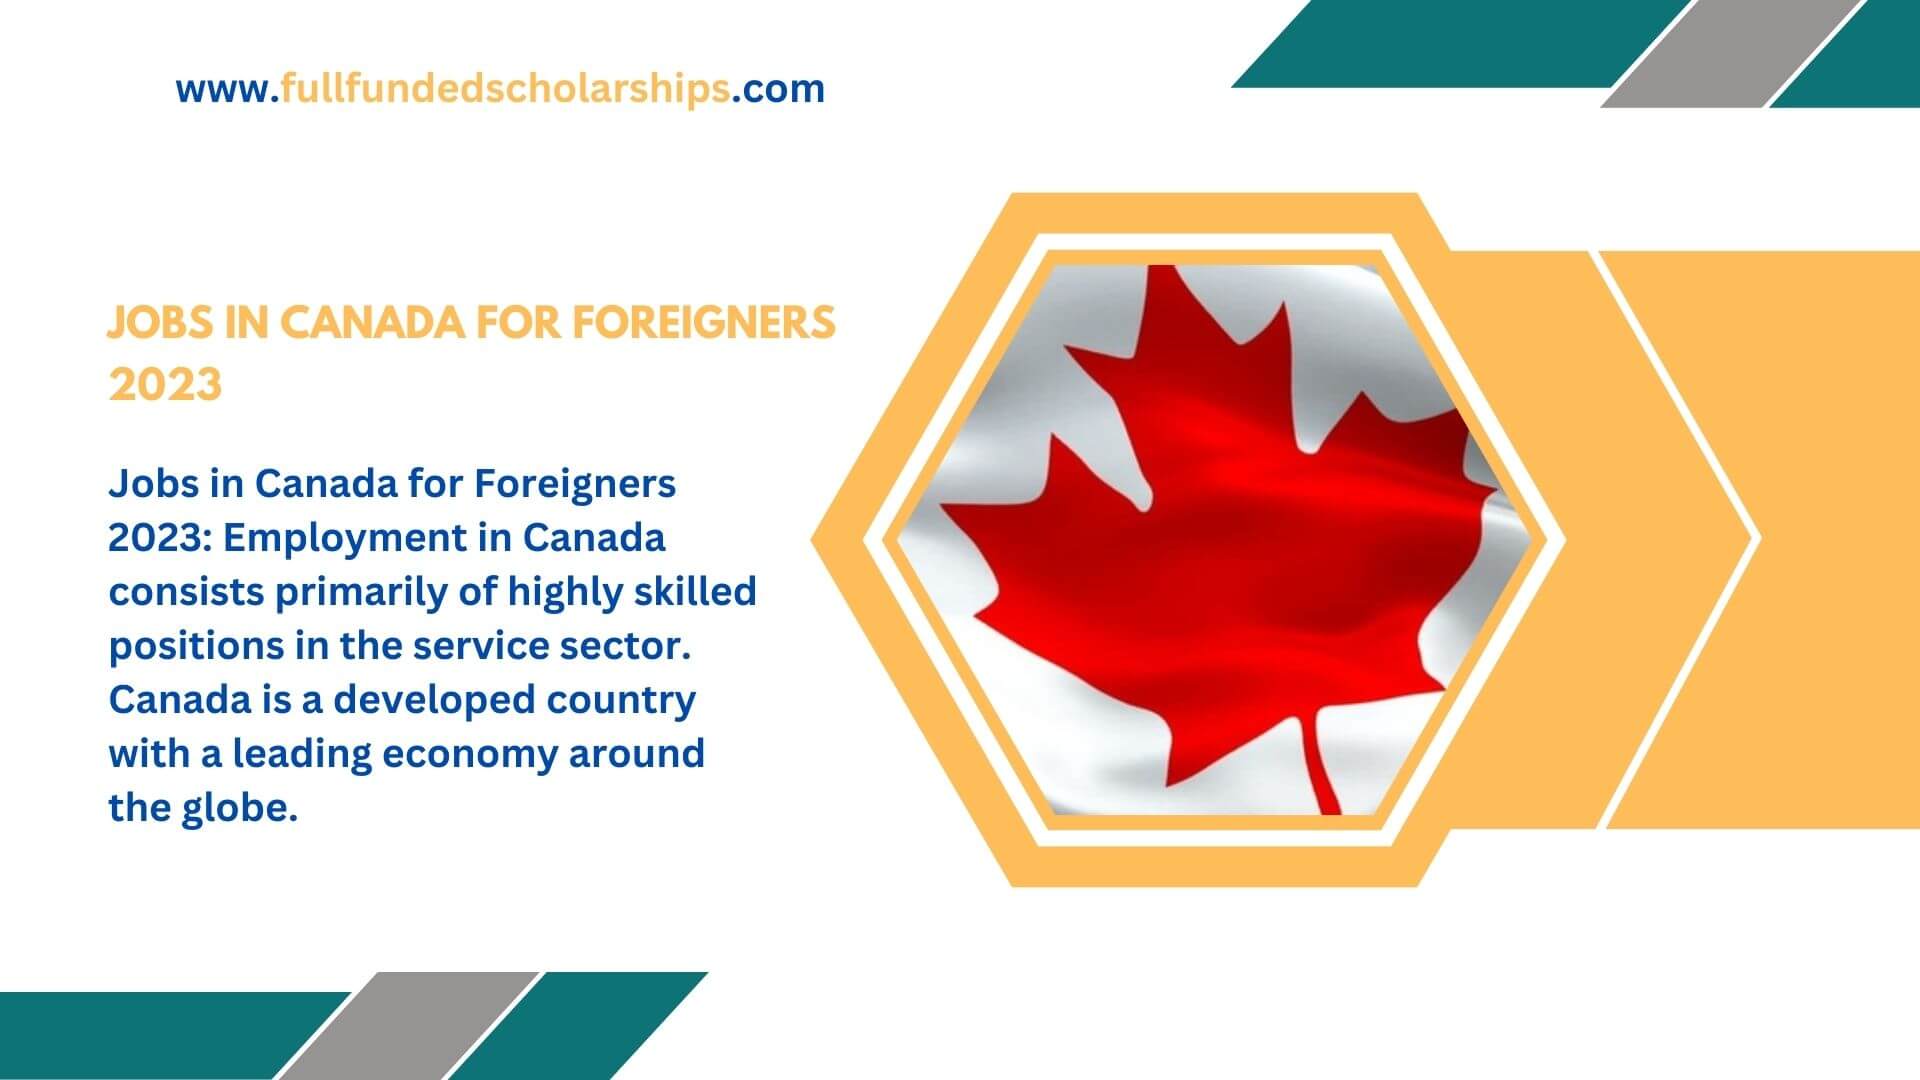 Jobs in Canada for Foreigners 2023